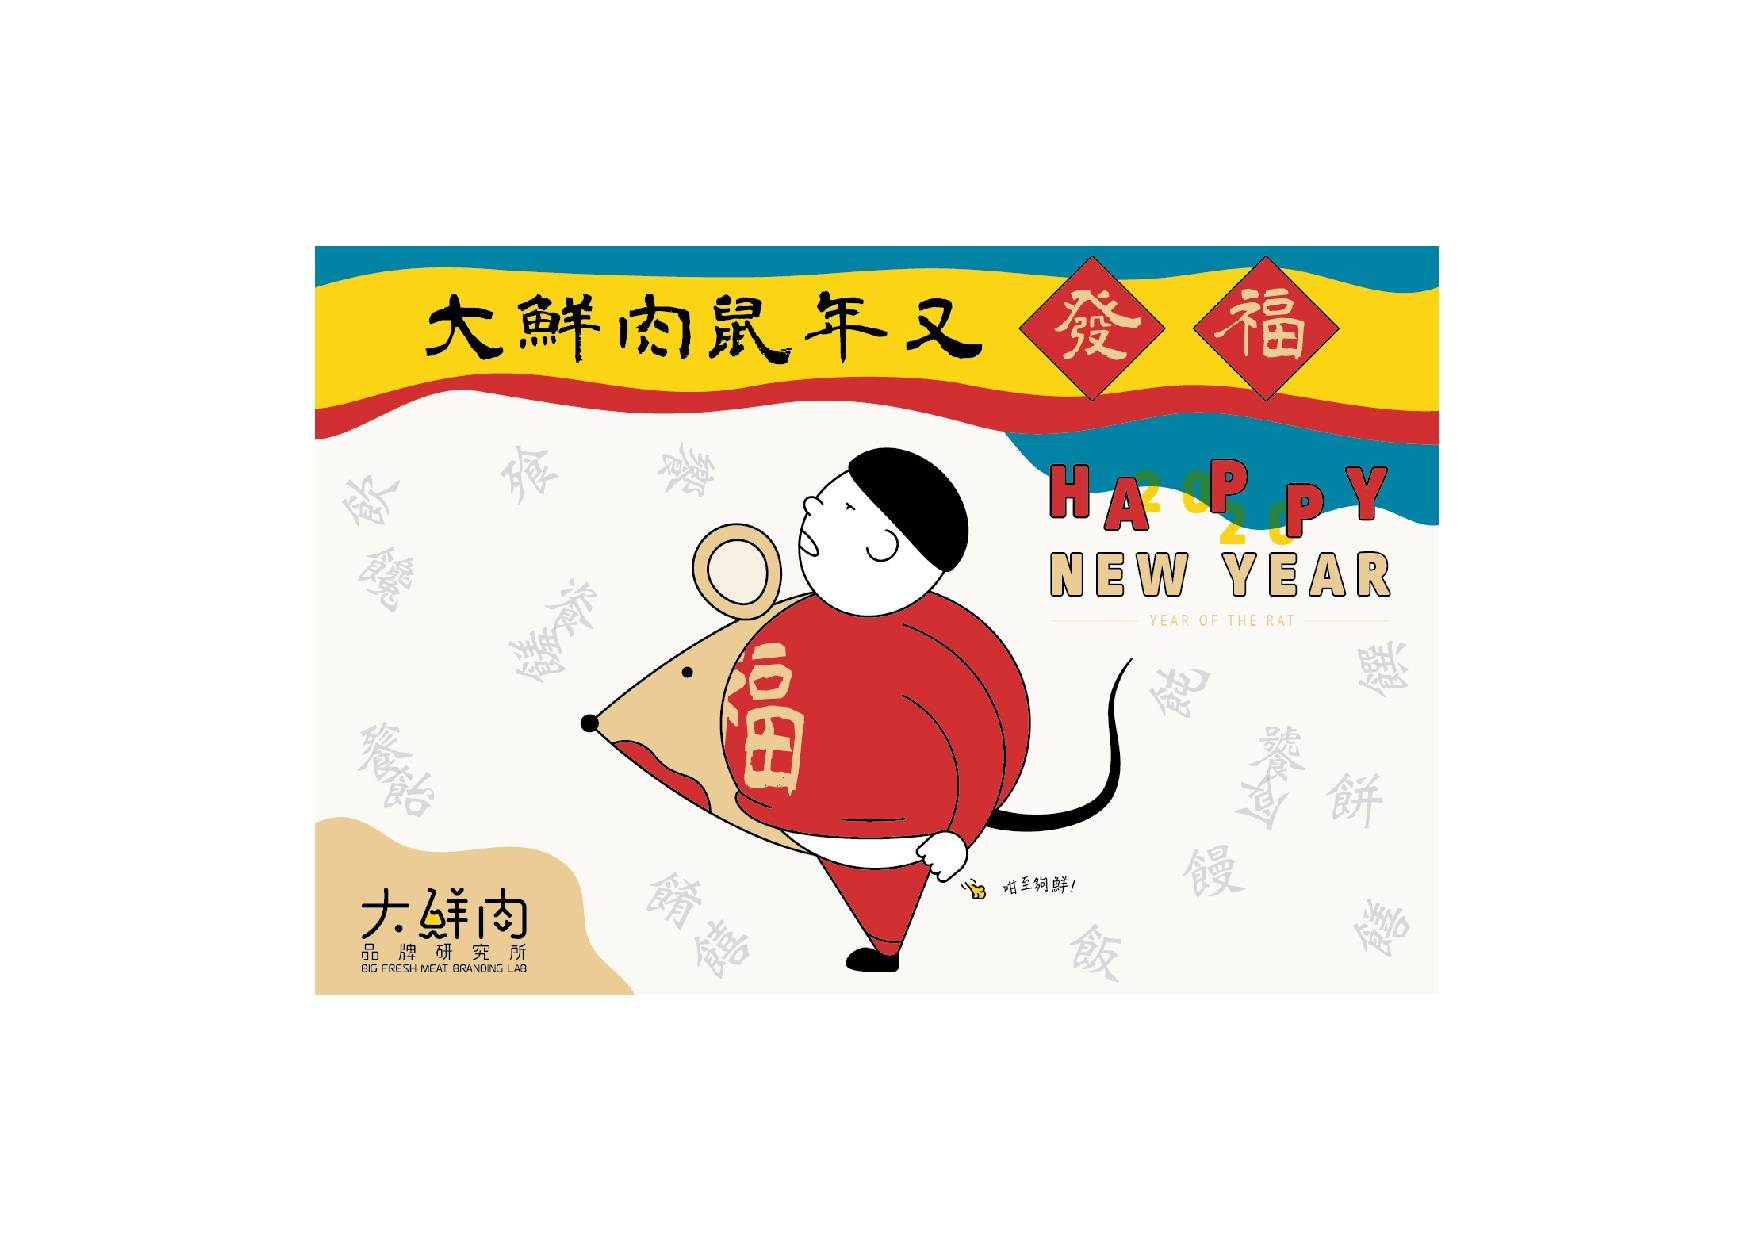 Big Fresh Meat branding for Facebook feeds a fat boy like a fat rat on Chinese New Year